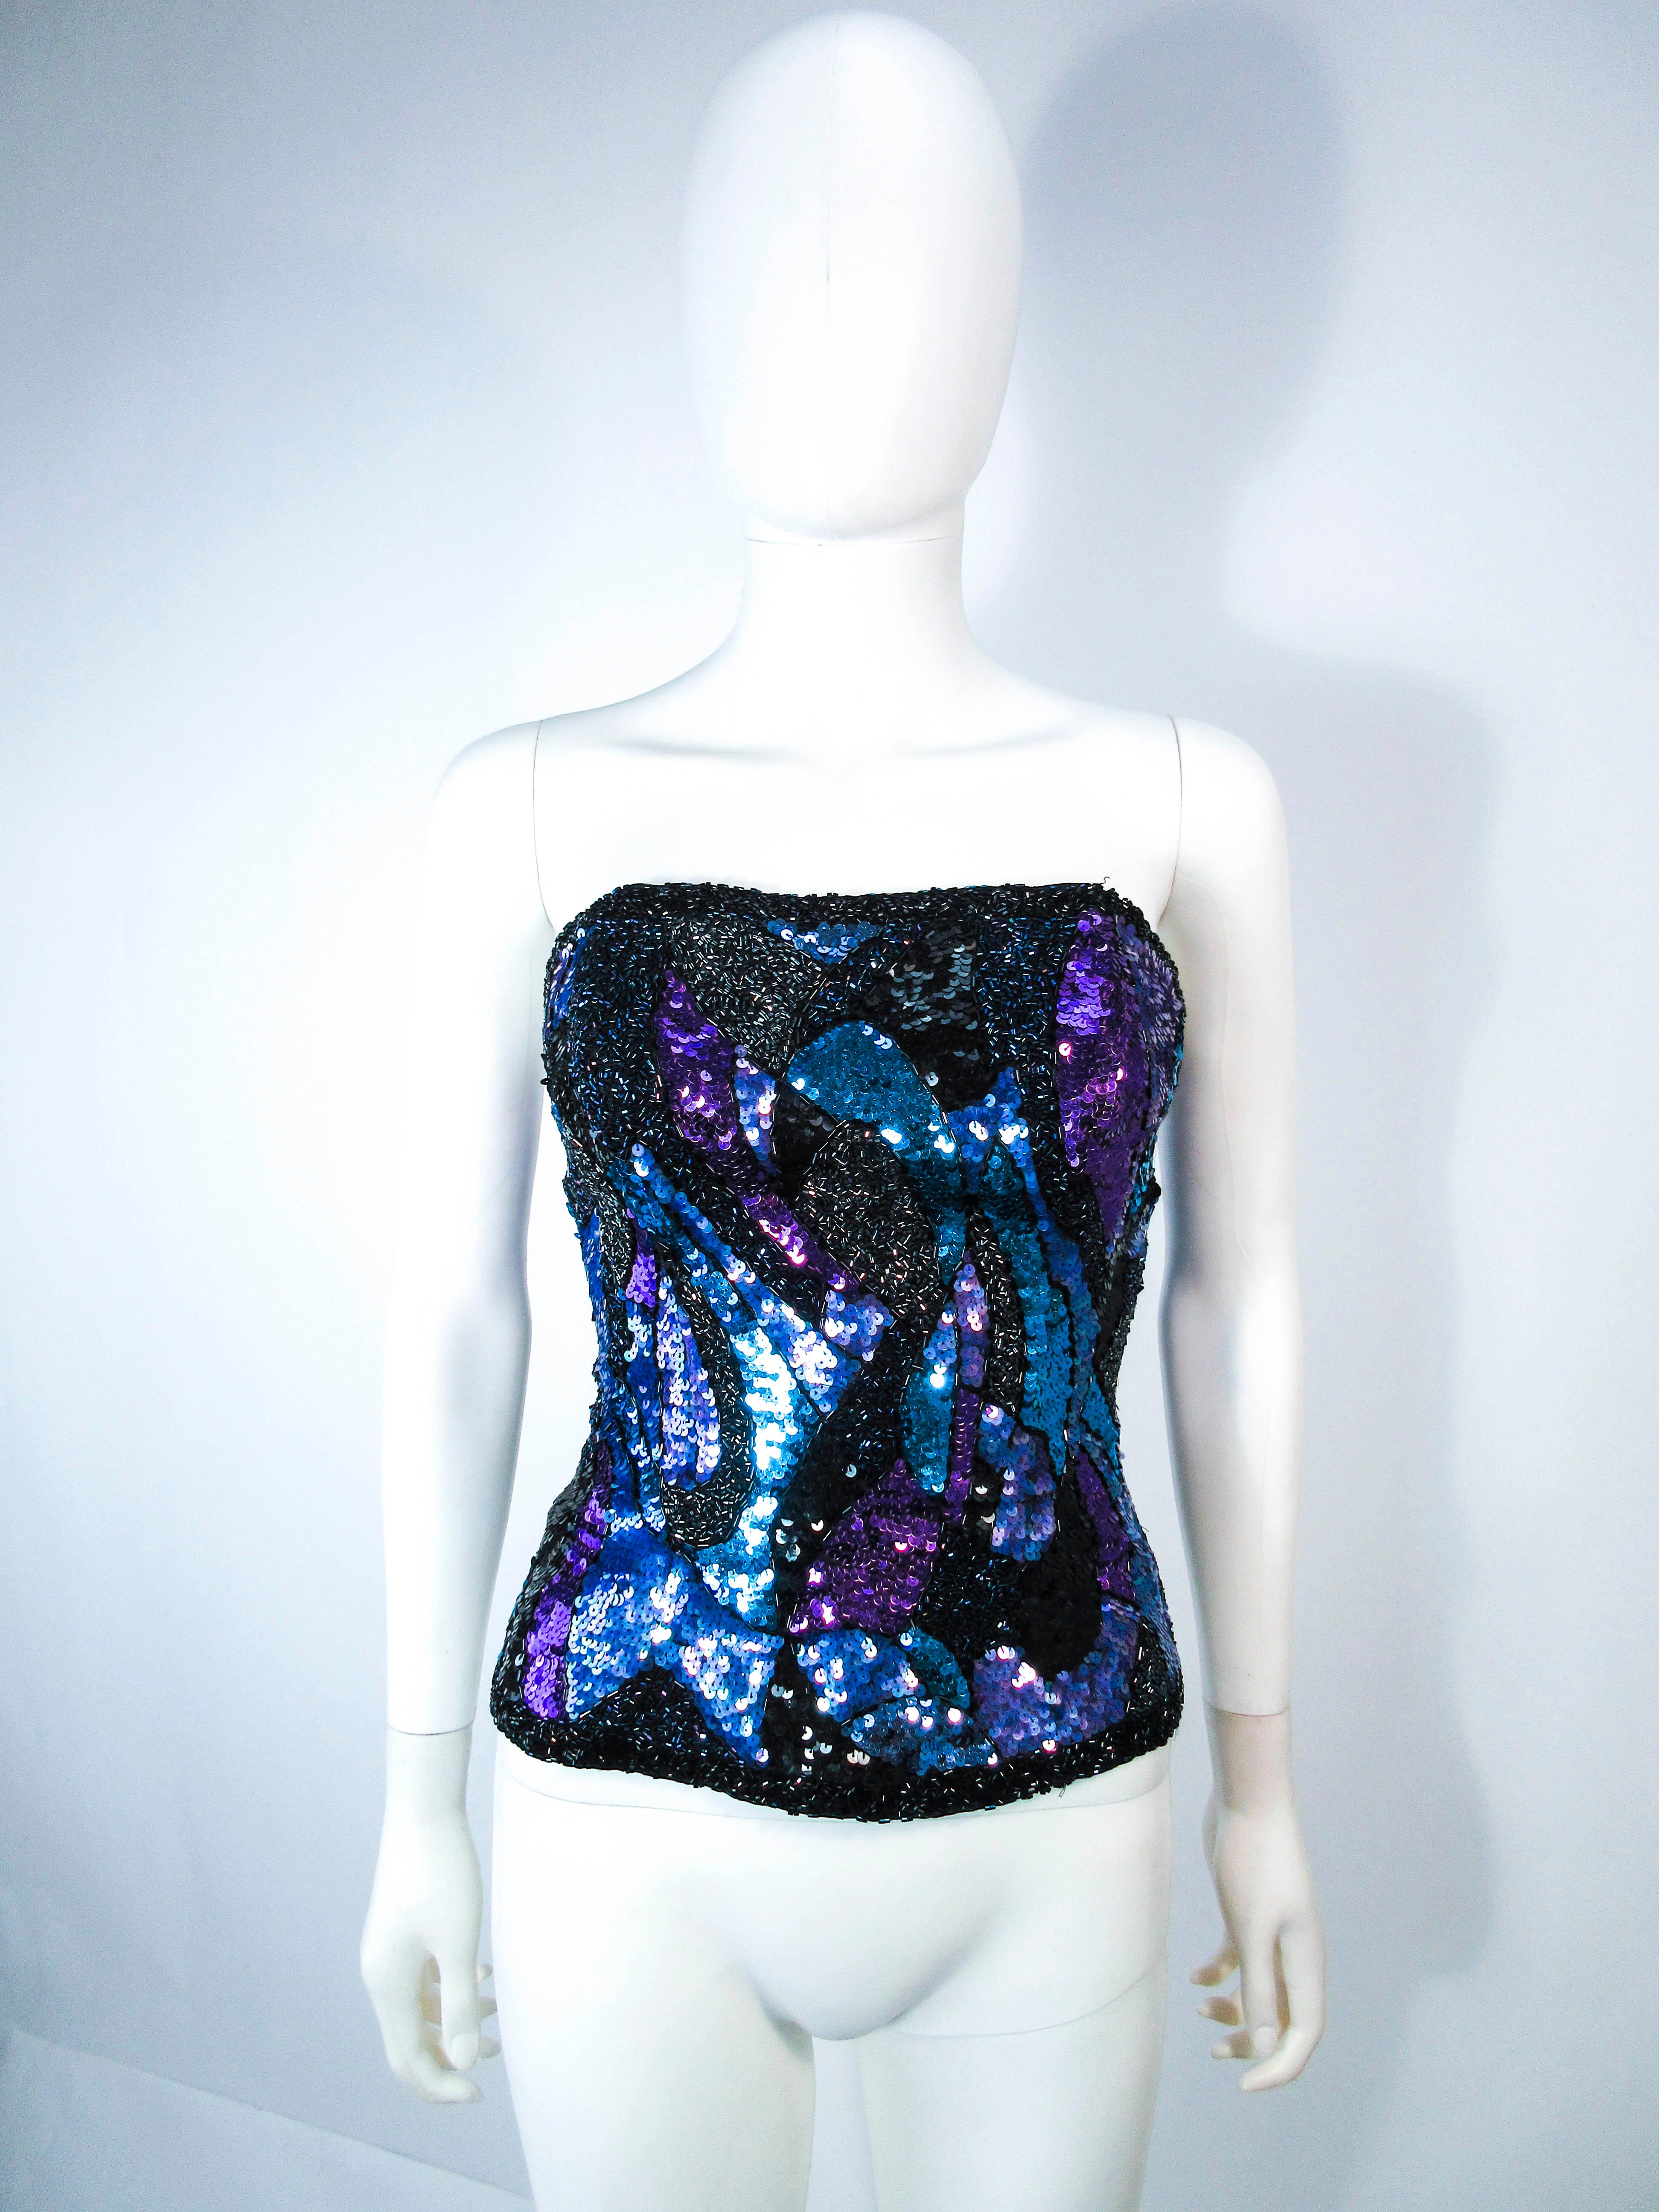 This vintage bustier is composed of an abstract sequin pattern, in blue, purple, and black with a beaded trim. Features a side zipper. In excellent vintage condition.

Jacket pictured with bustier is available for sale in a separate